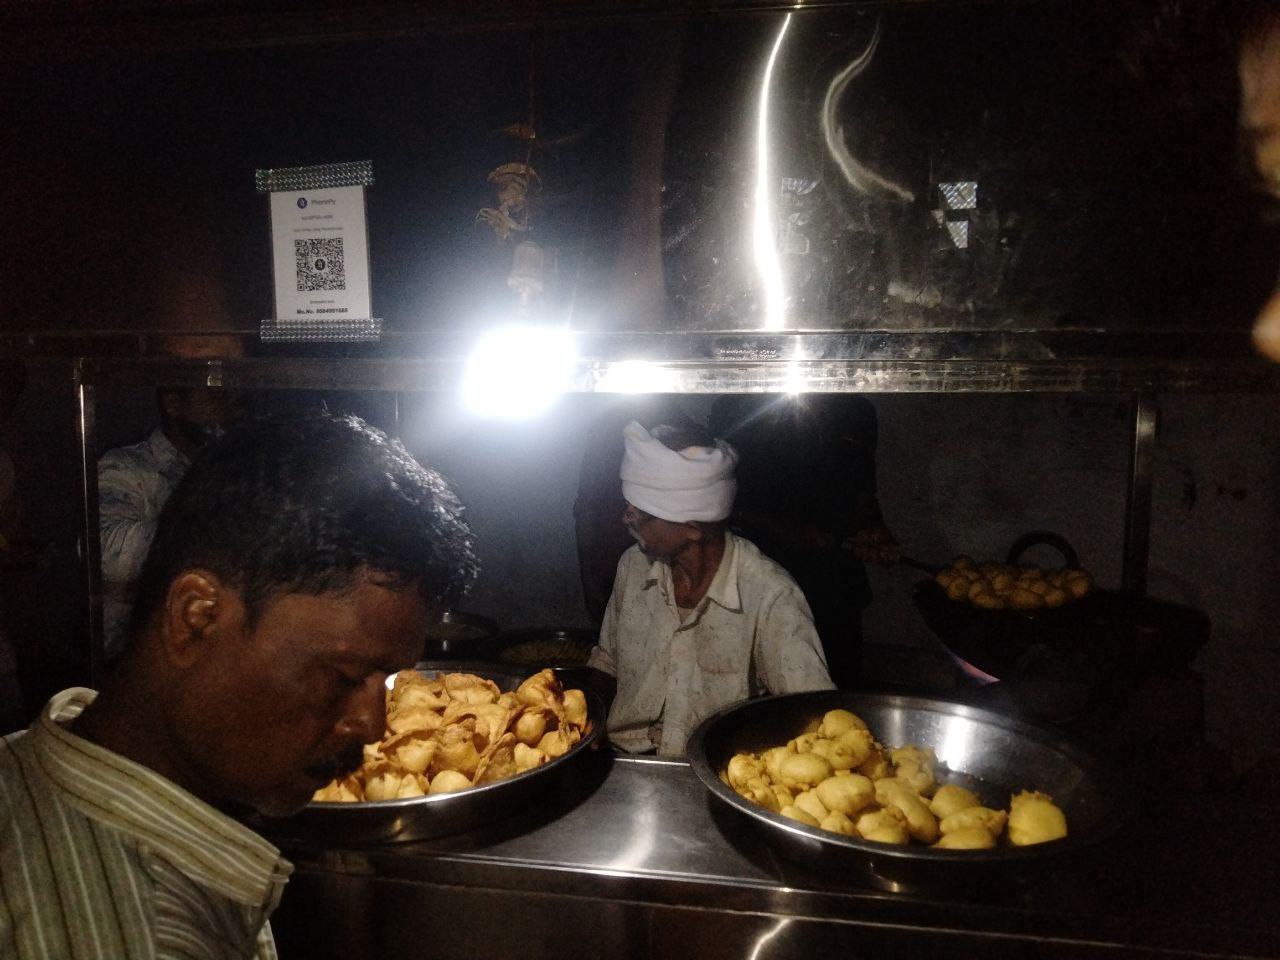 Here the shop of samosas and mangodi, operated for 41 years, starts ta